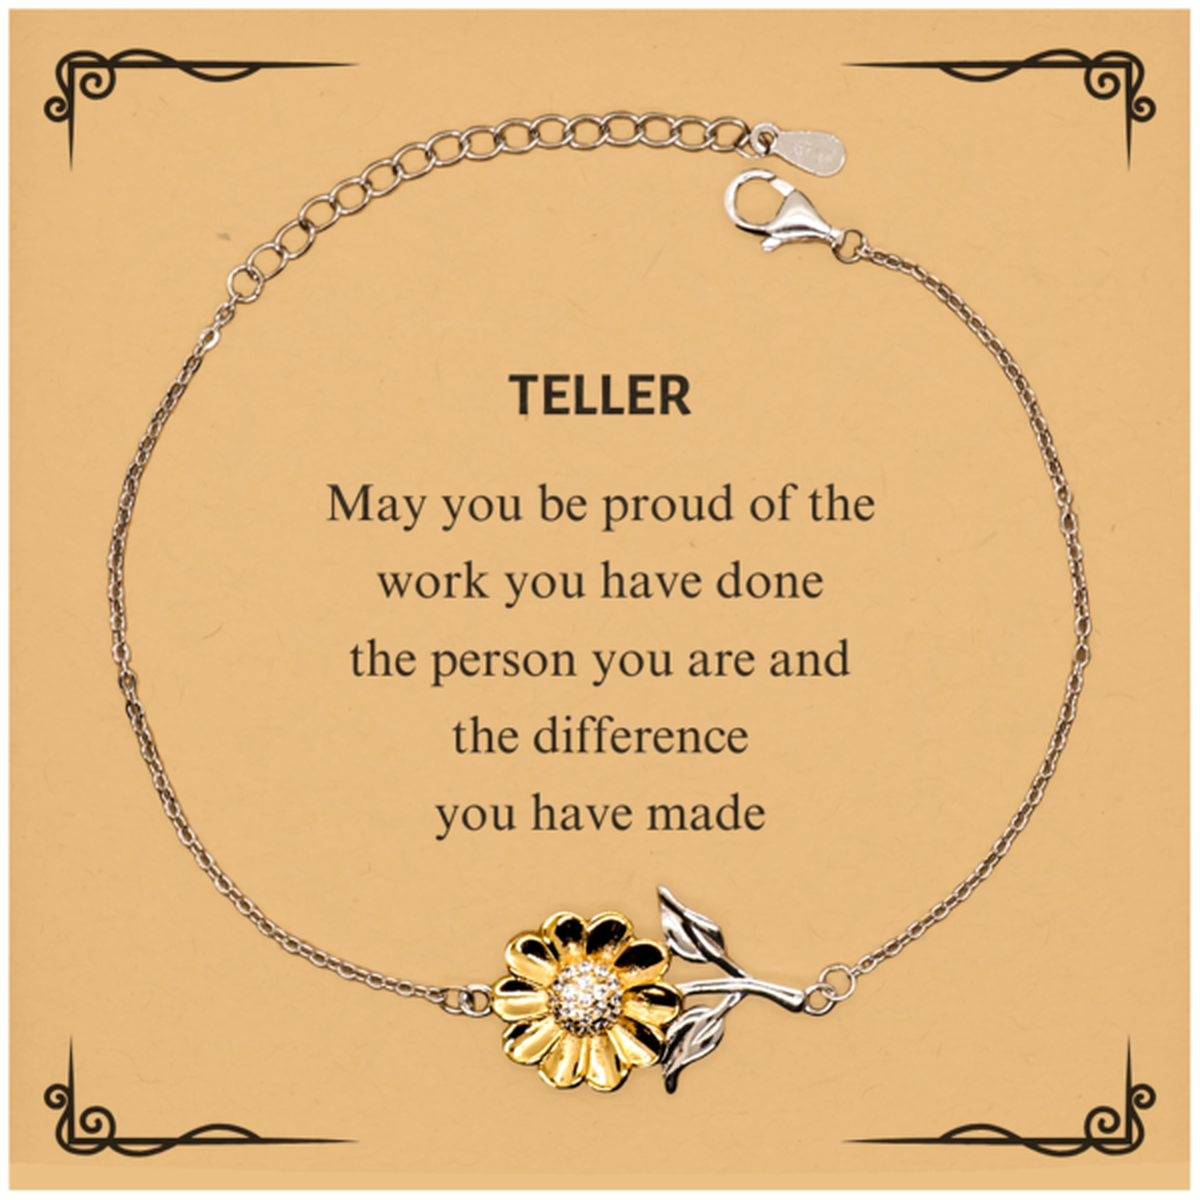 Teller May you be proud of the work you have done, Retirement Teller Sunflower Bracelet for Colleague Appreciation Gifts Amazing for Teller